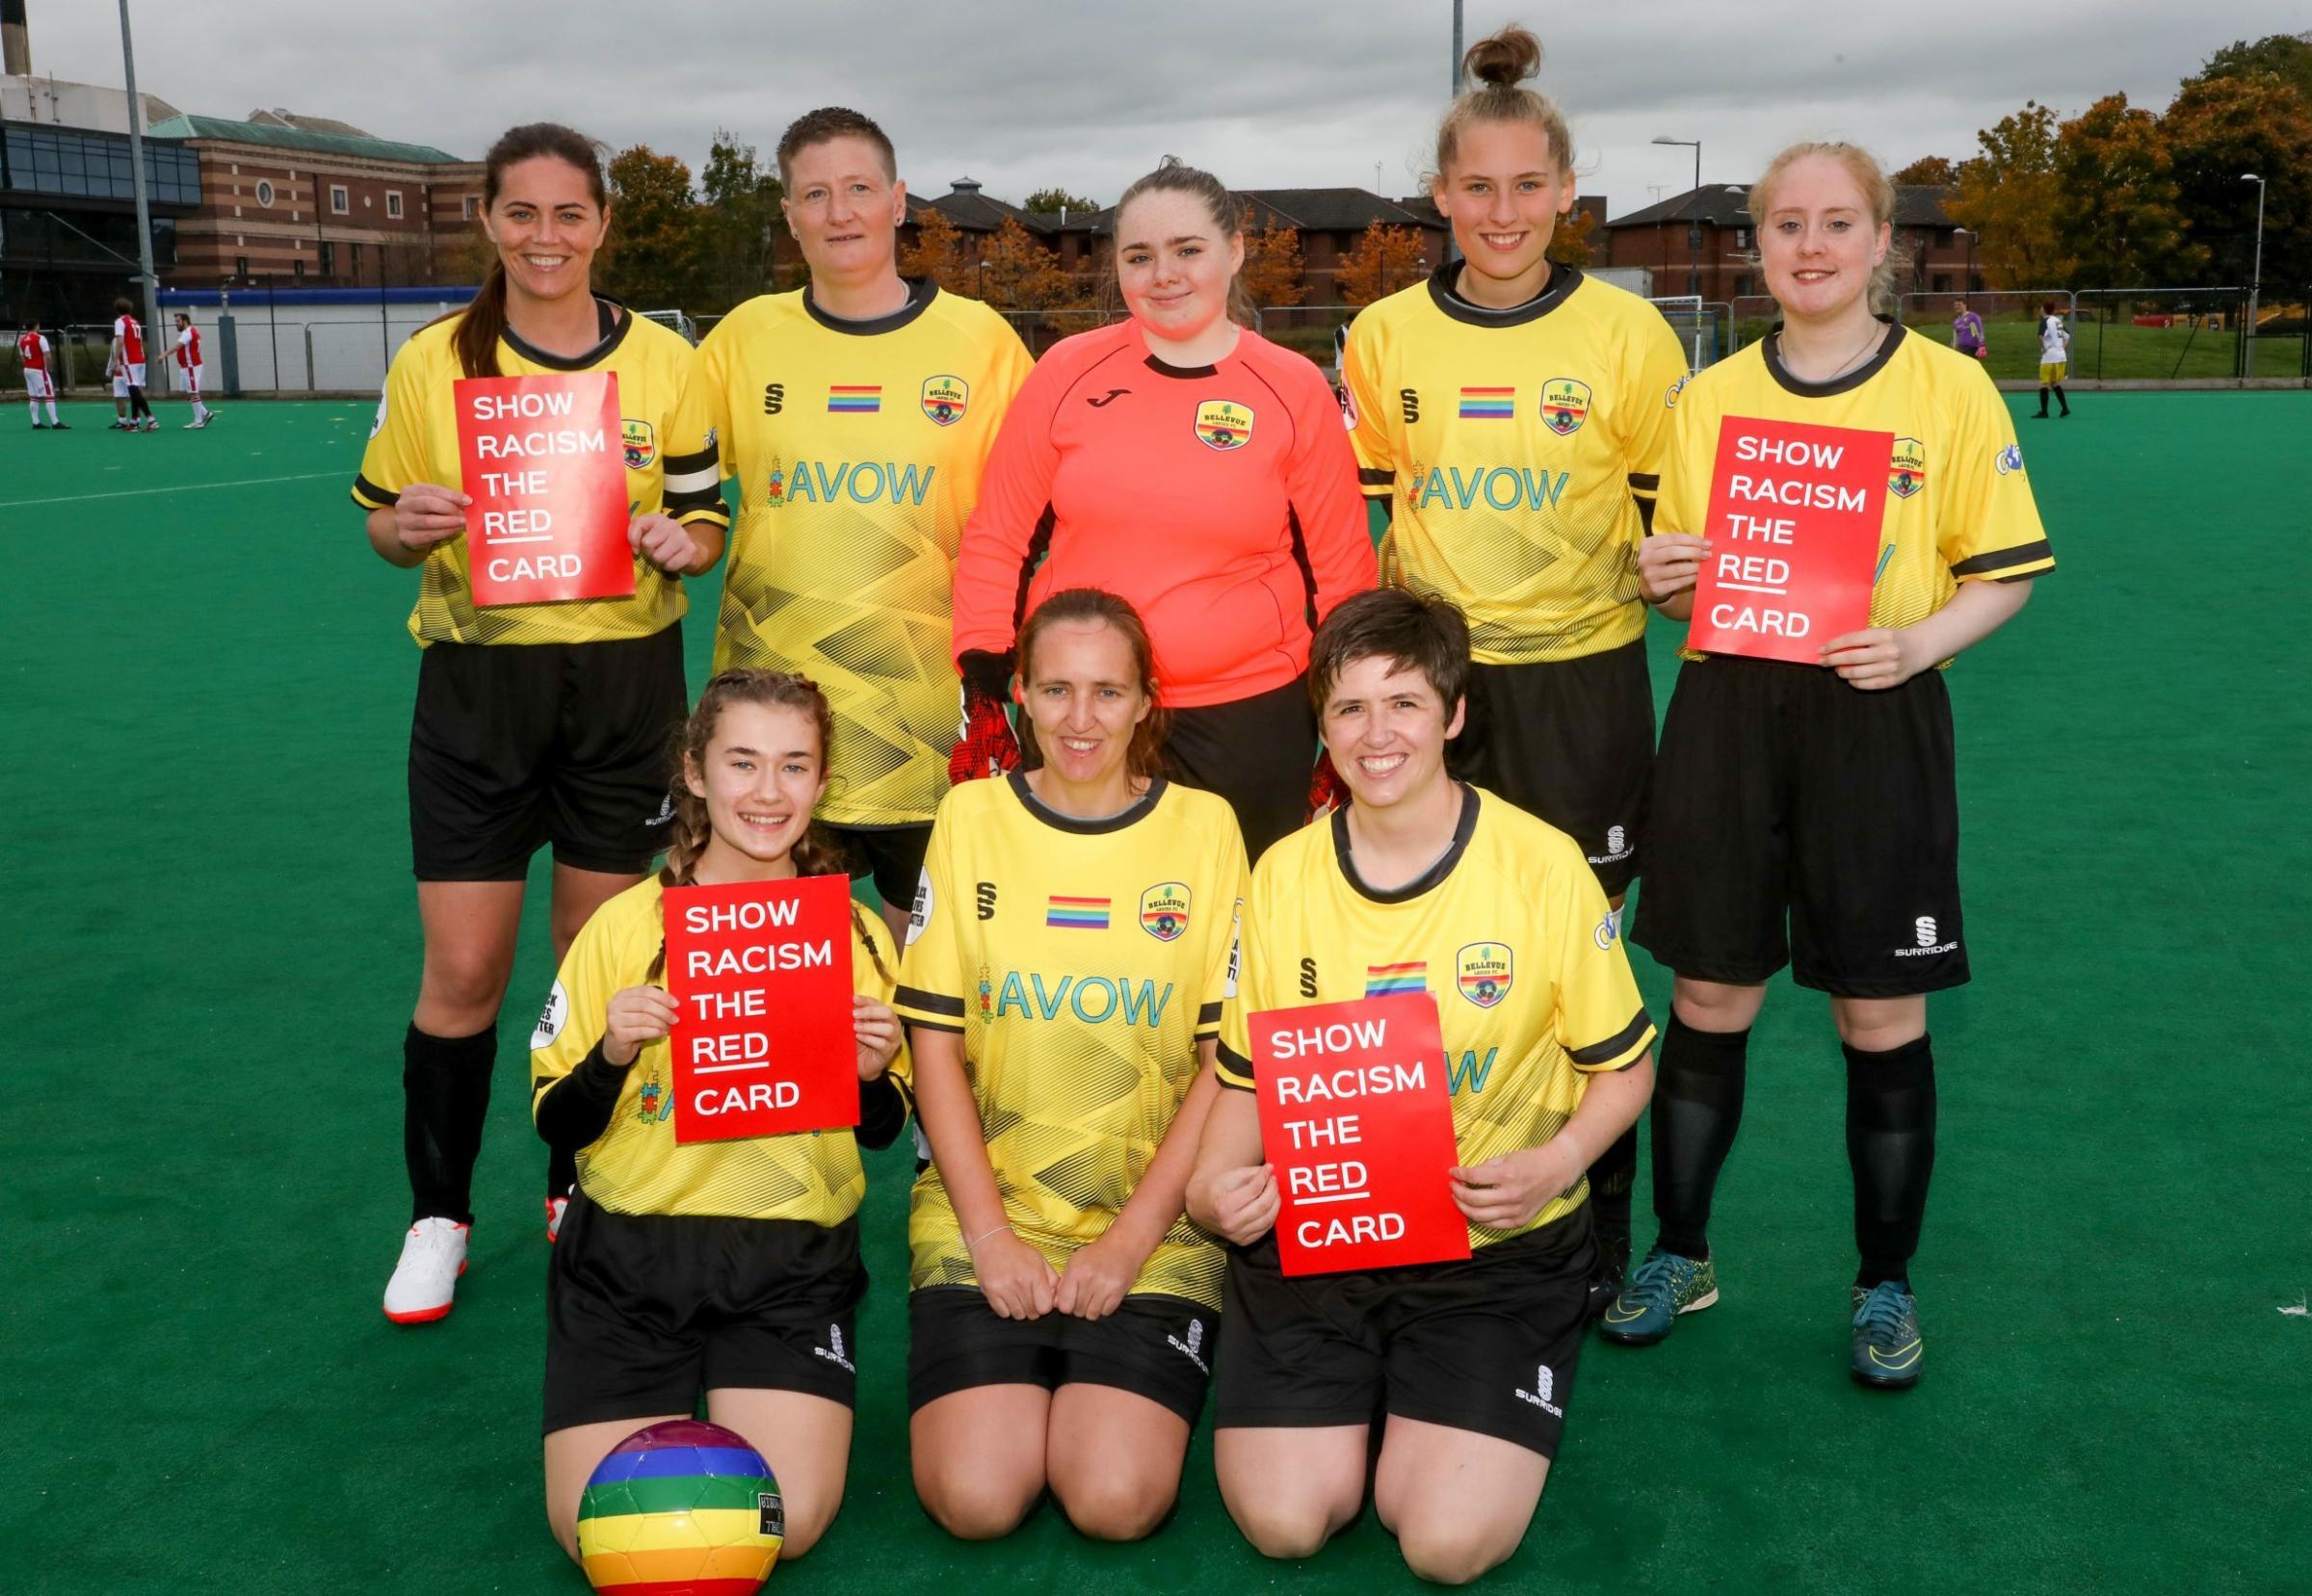 Tournament’s favourites – Belle Vue Ladies who were voted into the semi-finals by the other teams.